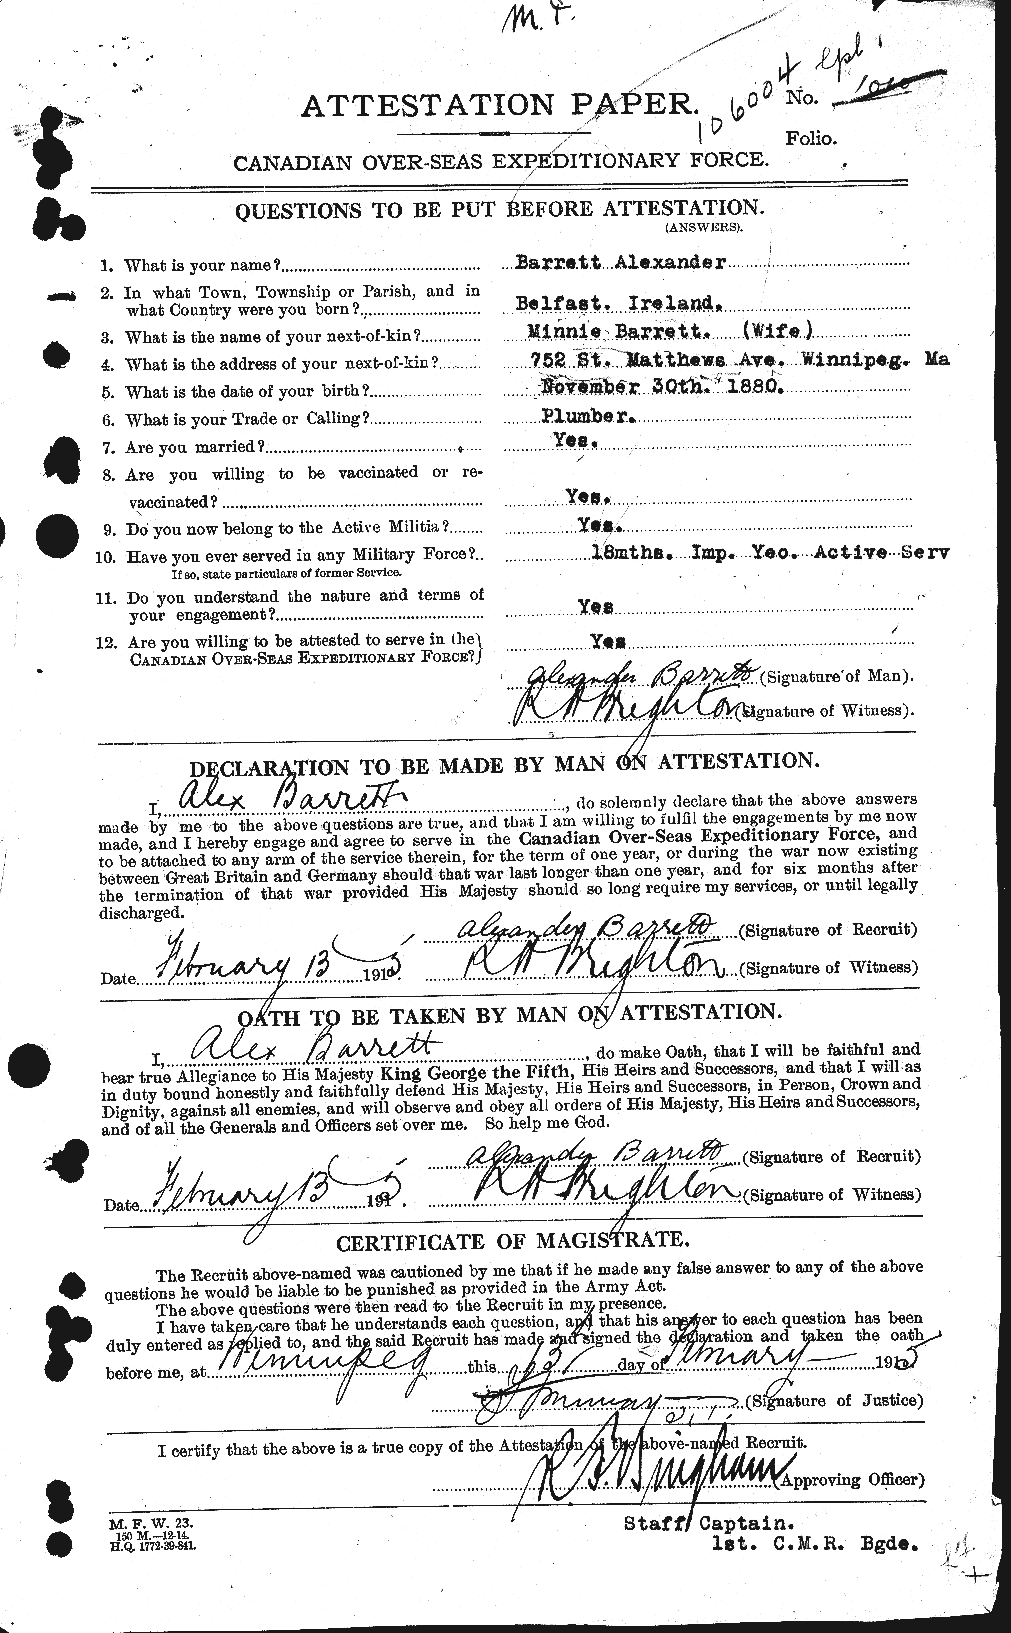 Personnel Records of the First World War - CEF 222204a